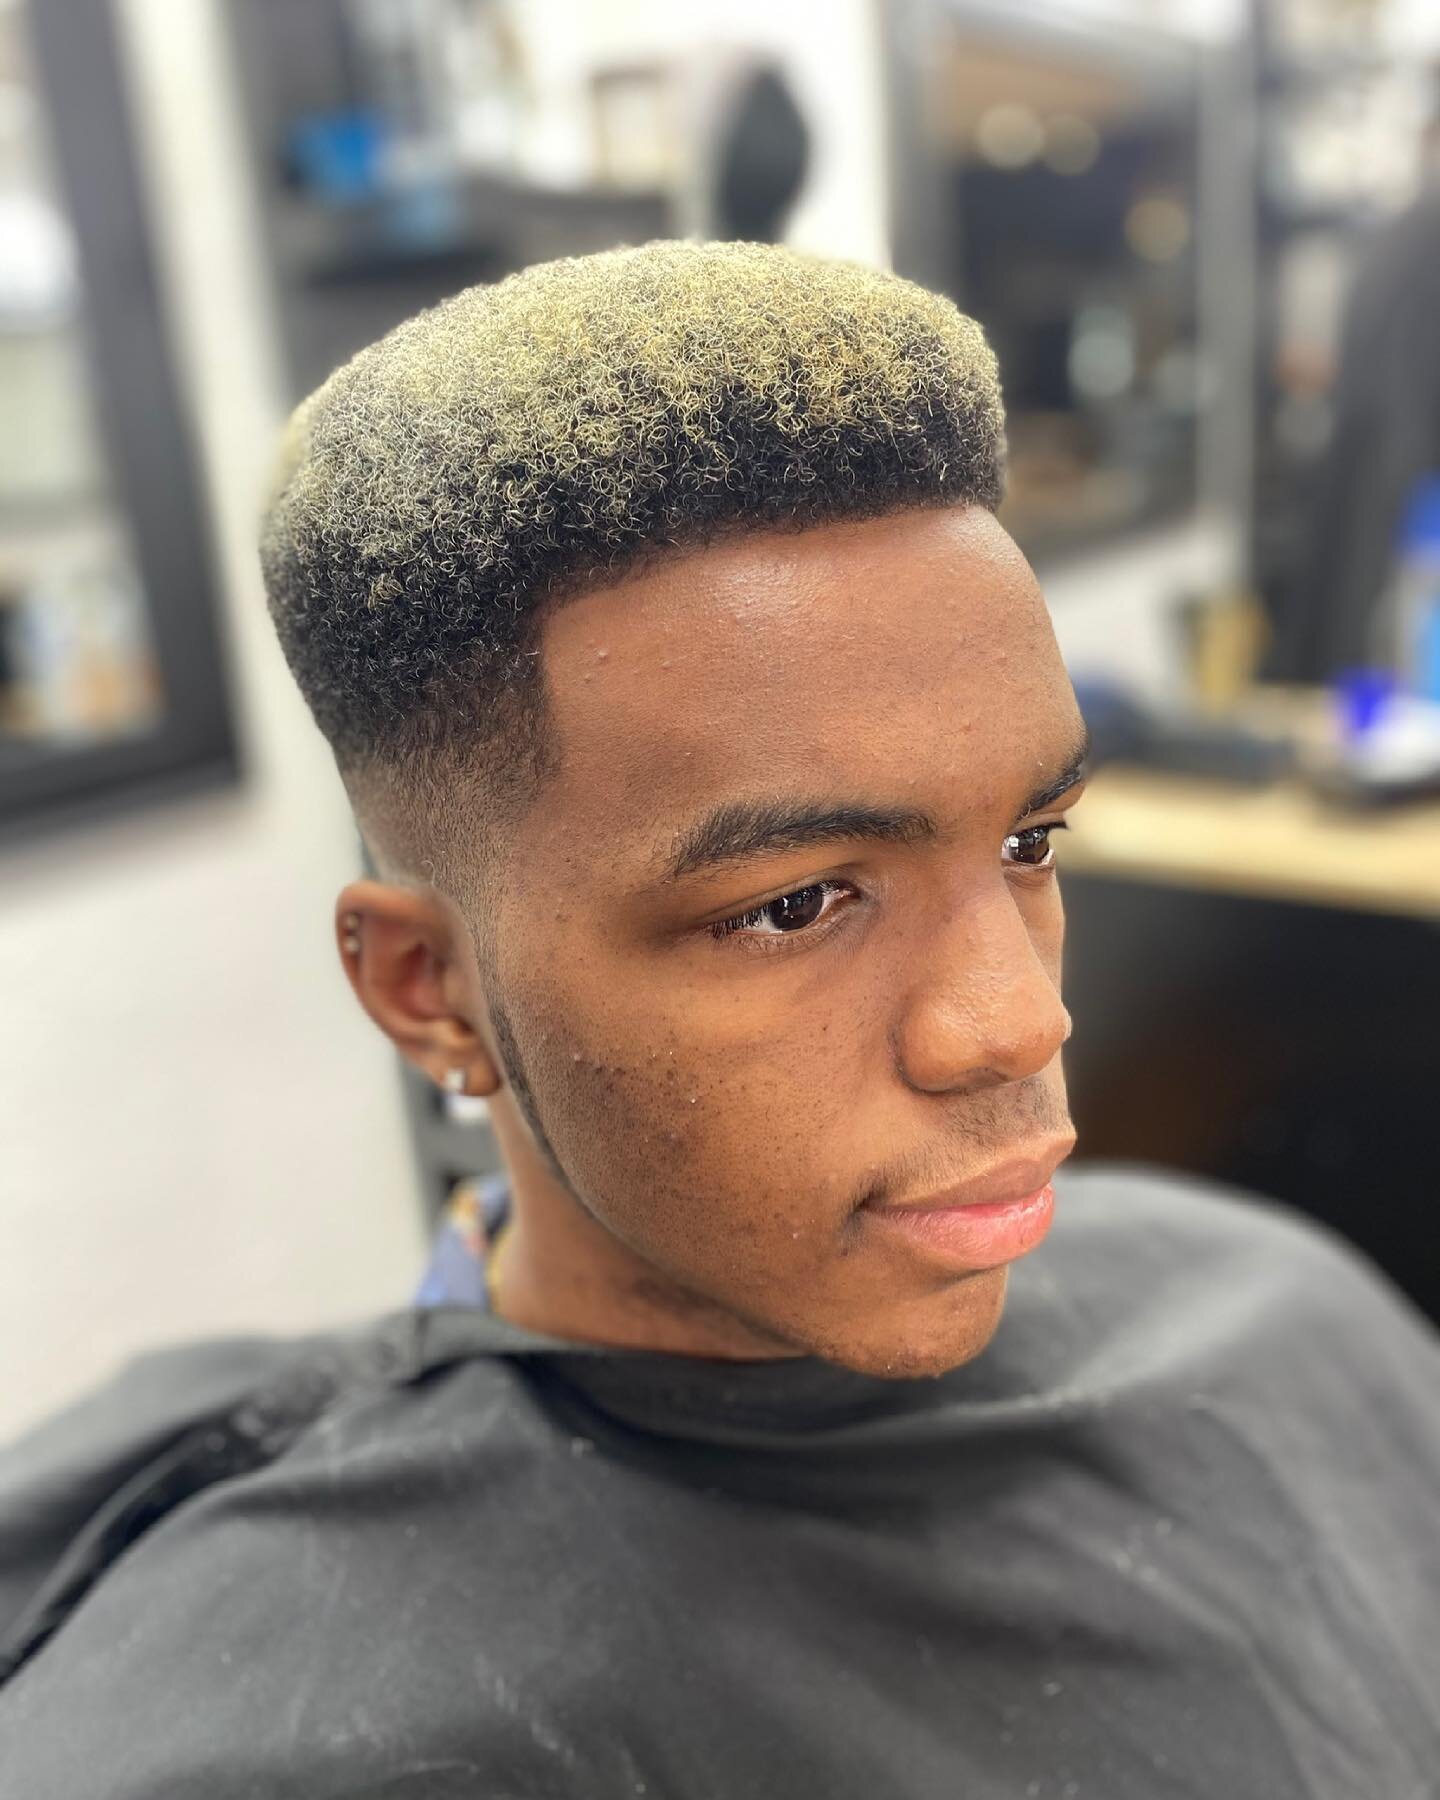 👱🏾&zwj;♂️ 2K Create A Player Loading&hellip;
✂️ Cut by : Dubb
💈 Book online! Hit the link in the bio!
.
.
.
.
.
.
#UltimateBarber #MidwestBarbers #CrispyLineup #BlackBoy #BarberLife #Barber #Barbershop #StayHandsome #BarbershopConnect #NaturalHair